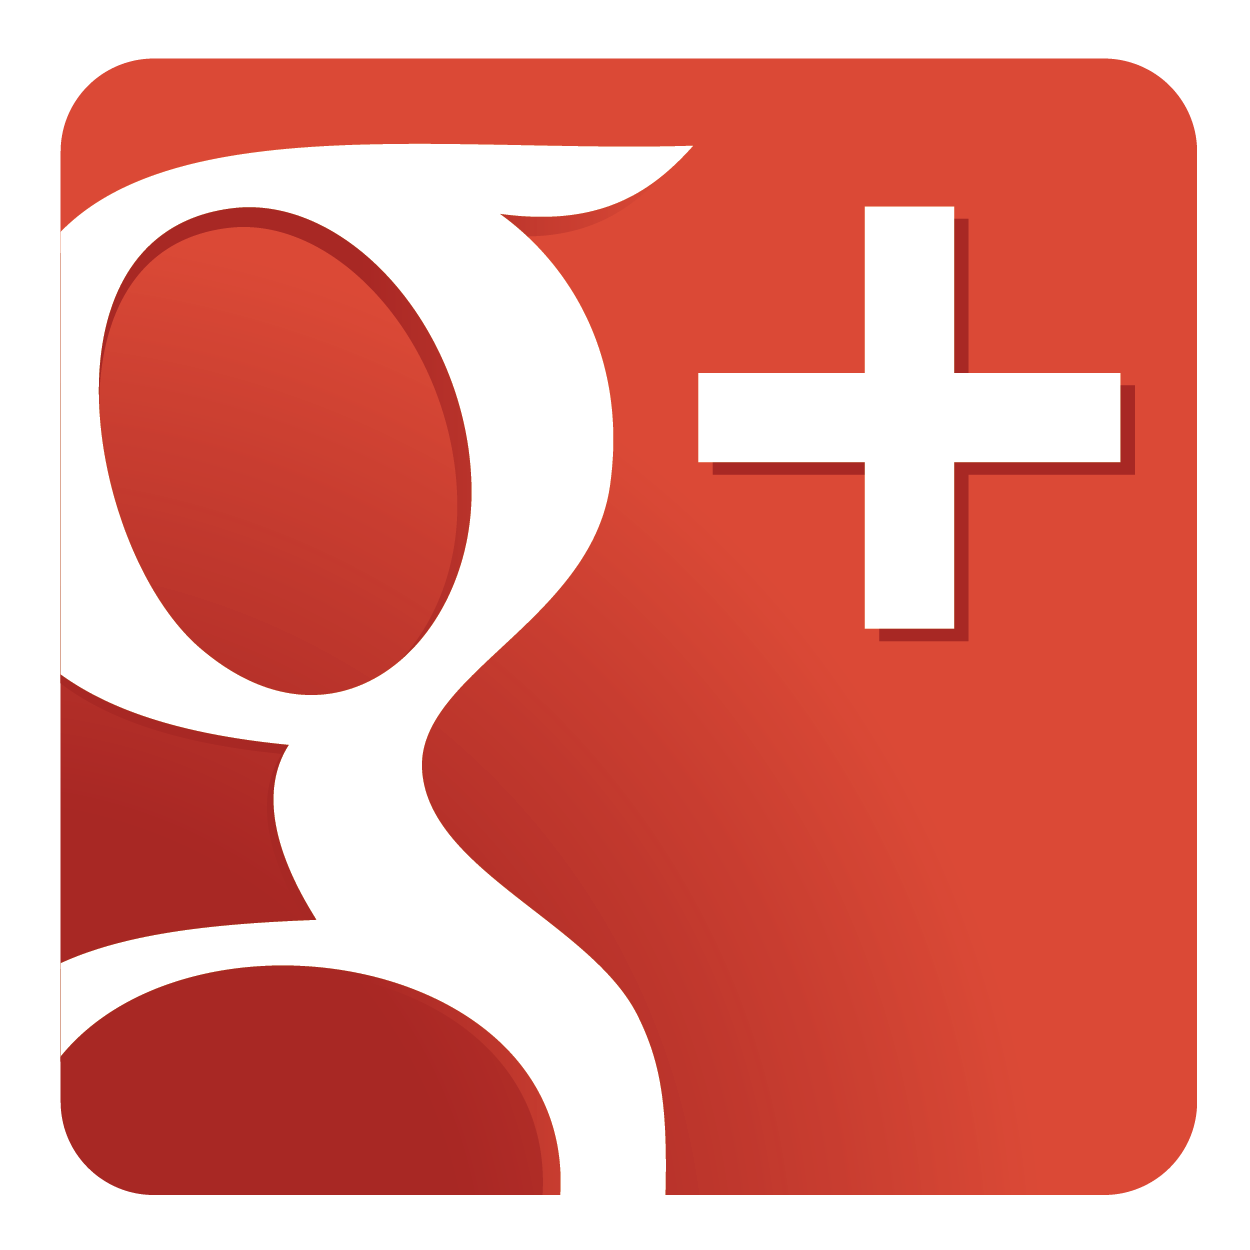 Red Transparent Logo - Google Plus Logo Transparent PNG Pictures - Free Icons and PNG ...